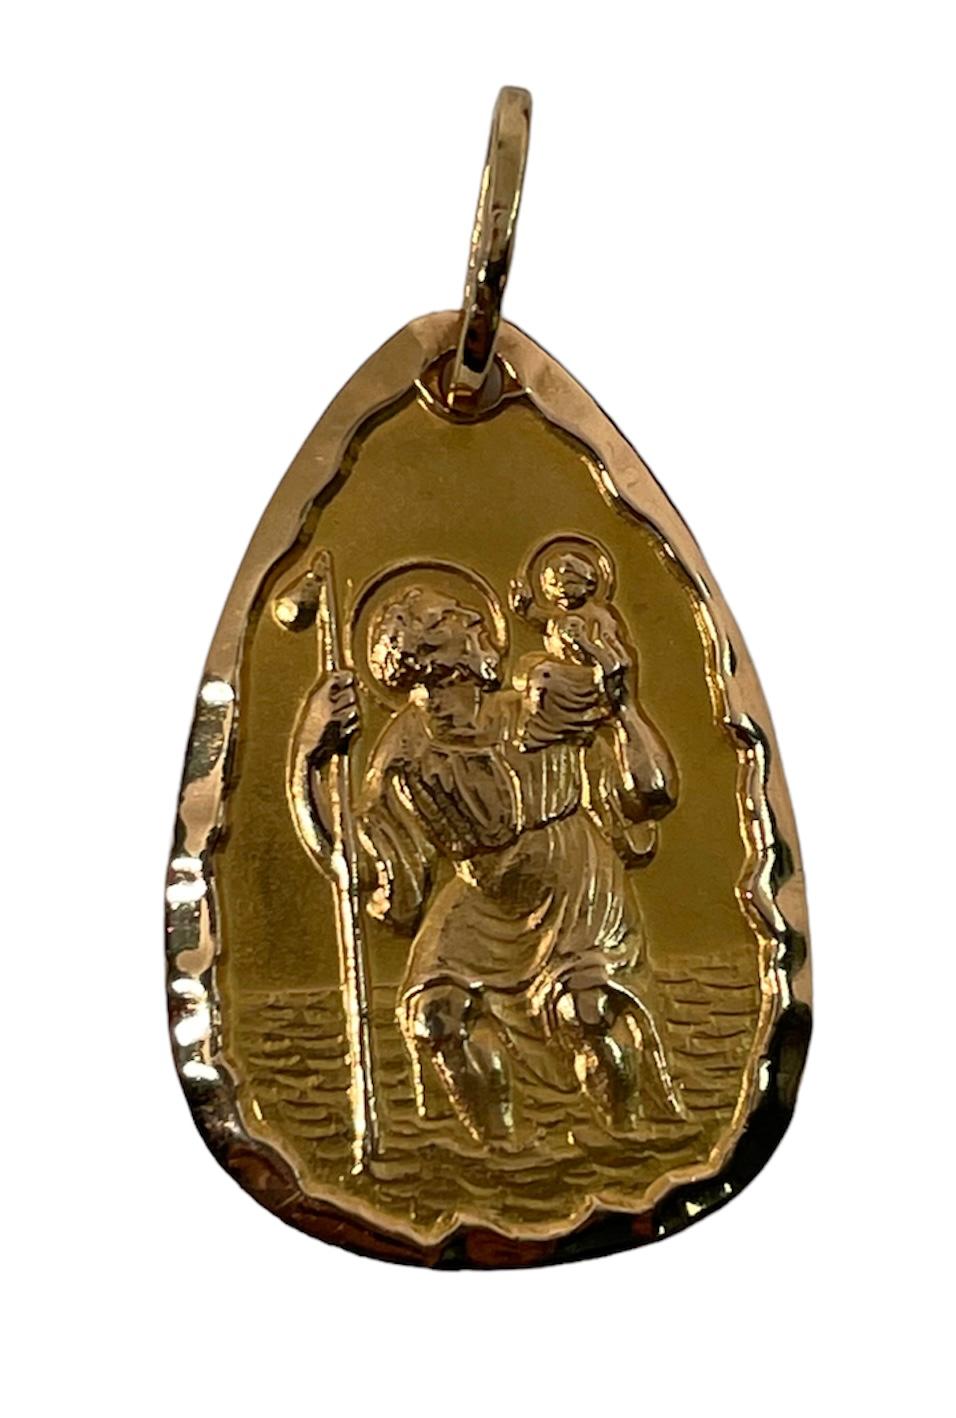 This is a rare 750 (18k) yellow gold religious medal pendant of Saint Christopher. It is pear shaped solid gold and depicts a very well done hand carving of St.Christopher who is carrying Baby Jesus with one hand and with the other one, his staff,